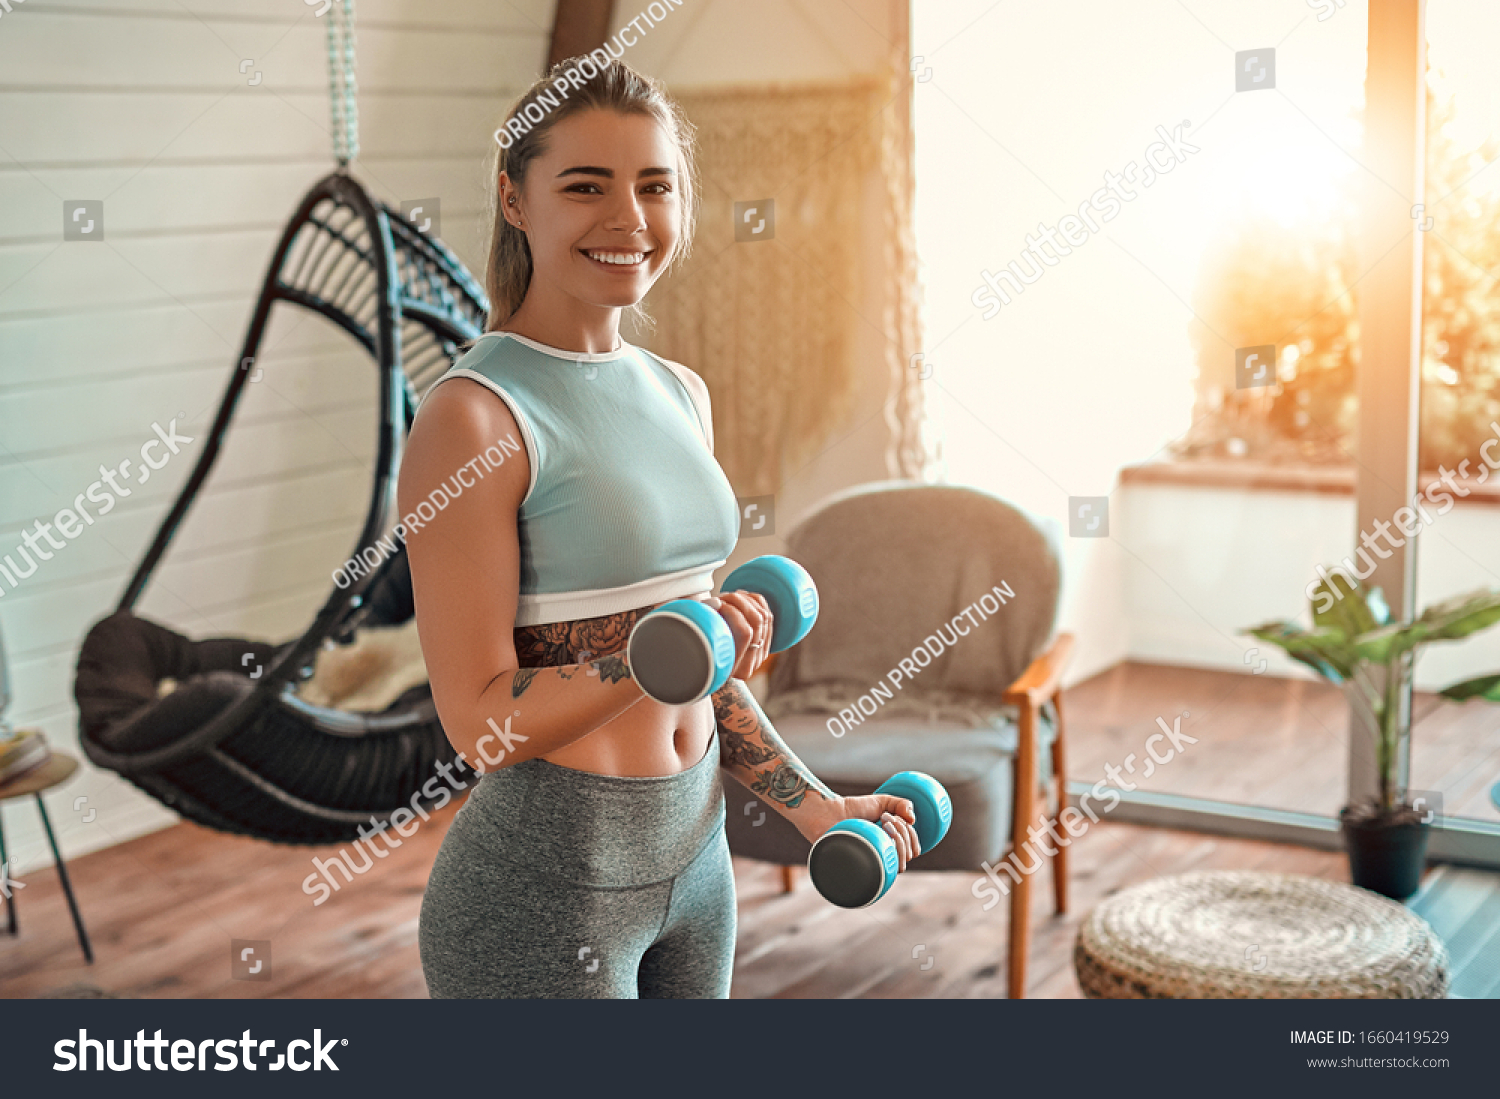 Determined woman losing weight at home and exercising with dumbbells. Sport and recreation concept. Beautiful woman in sportswear with blue dumbbells in her hands. #1660419529